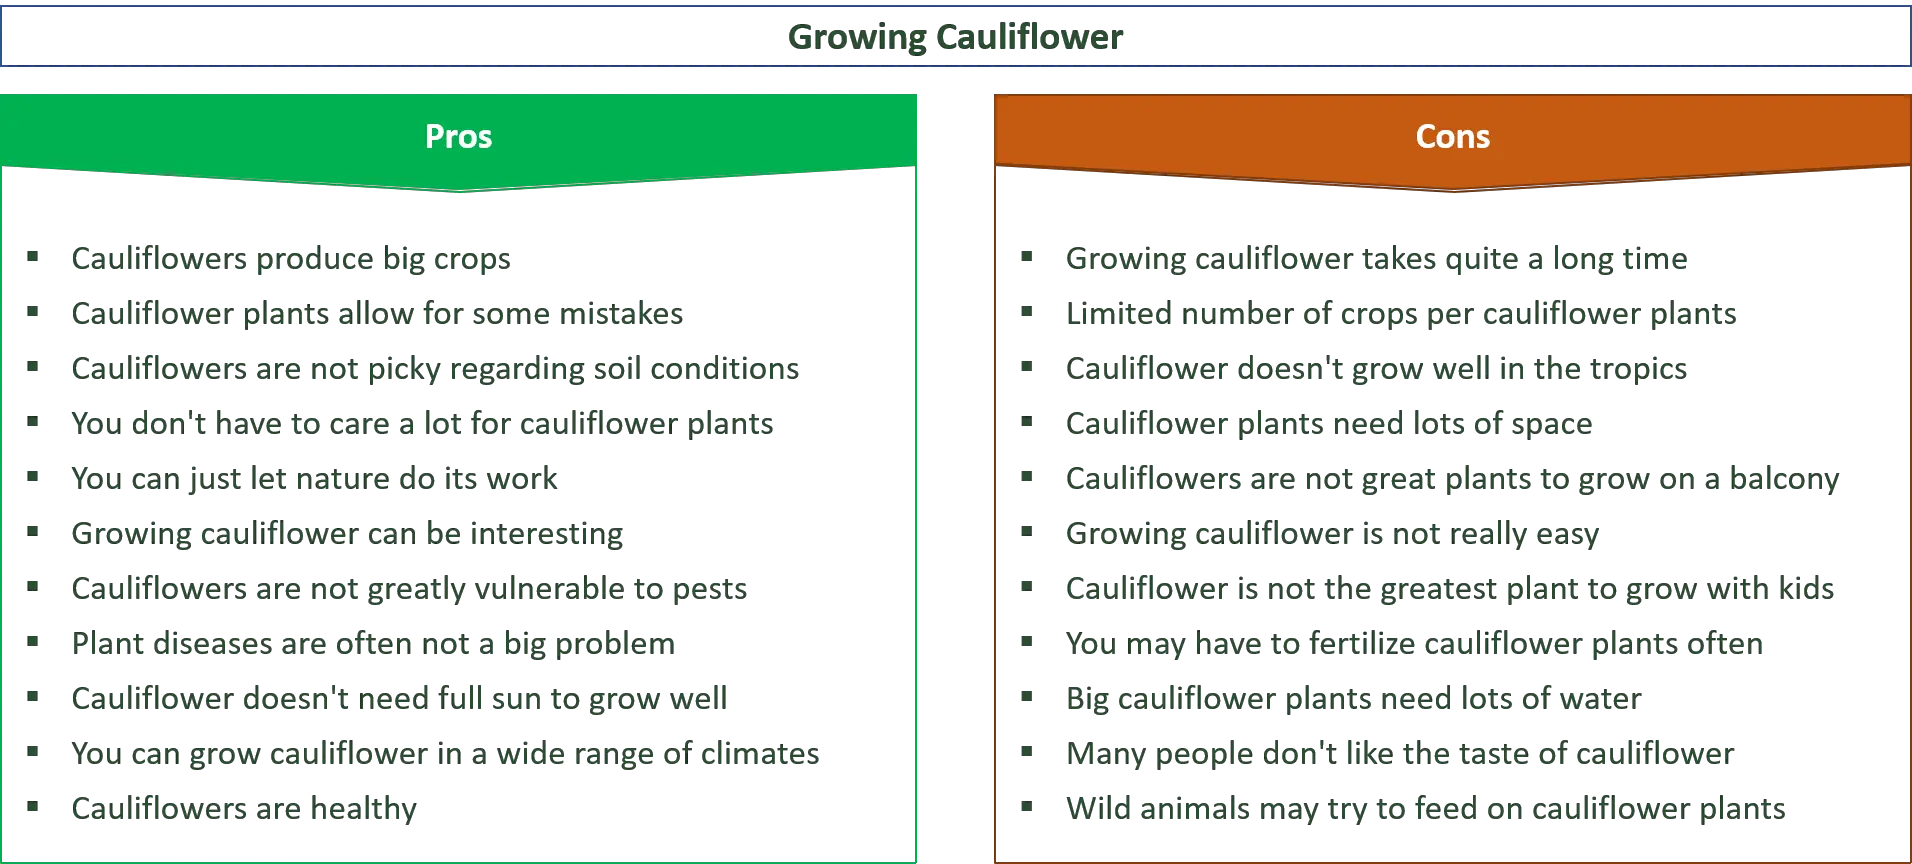 advantages and disadvantages of growing cauliflower